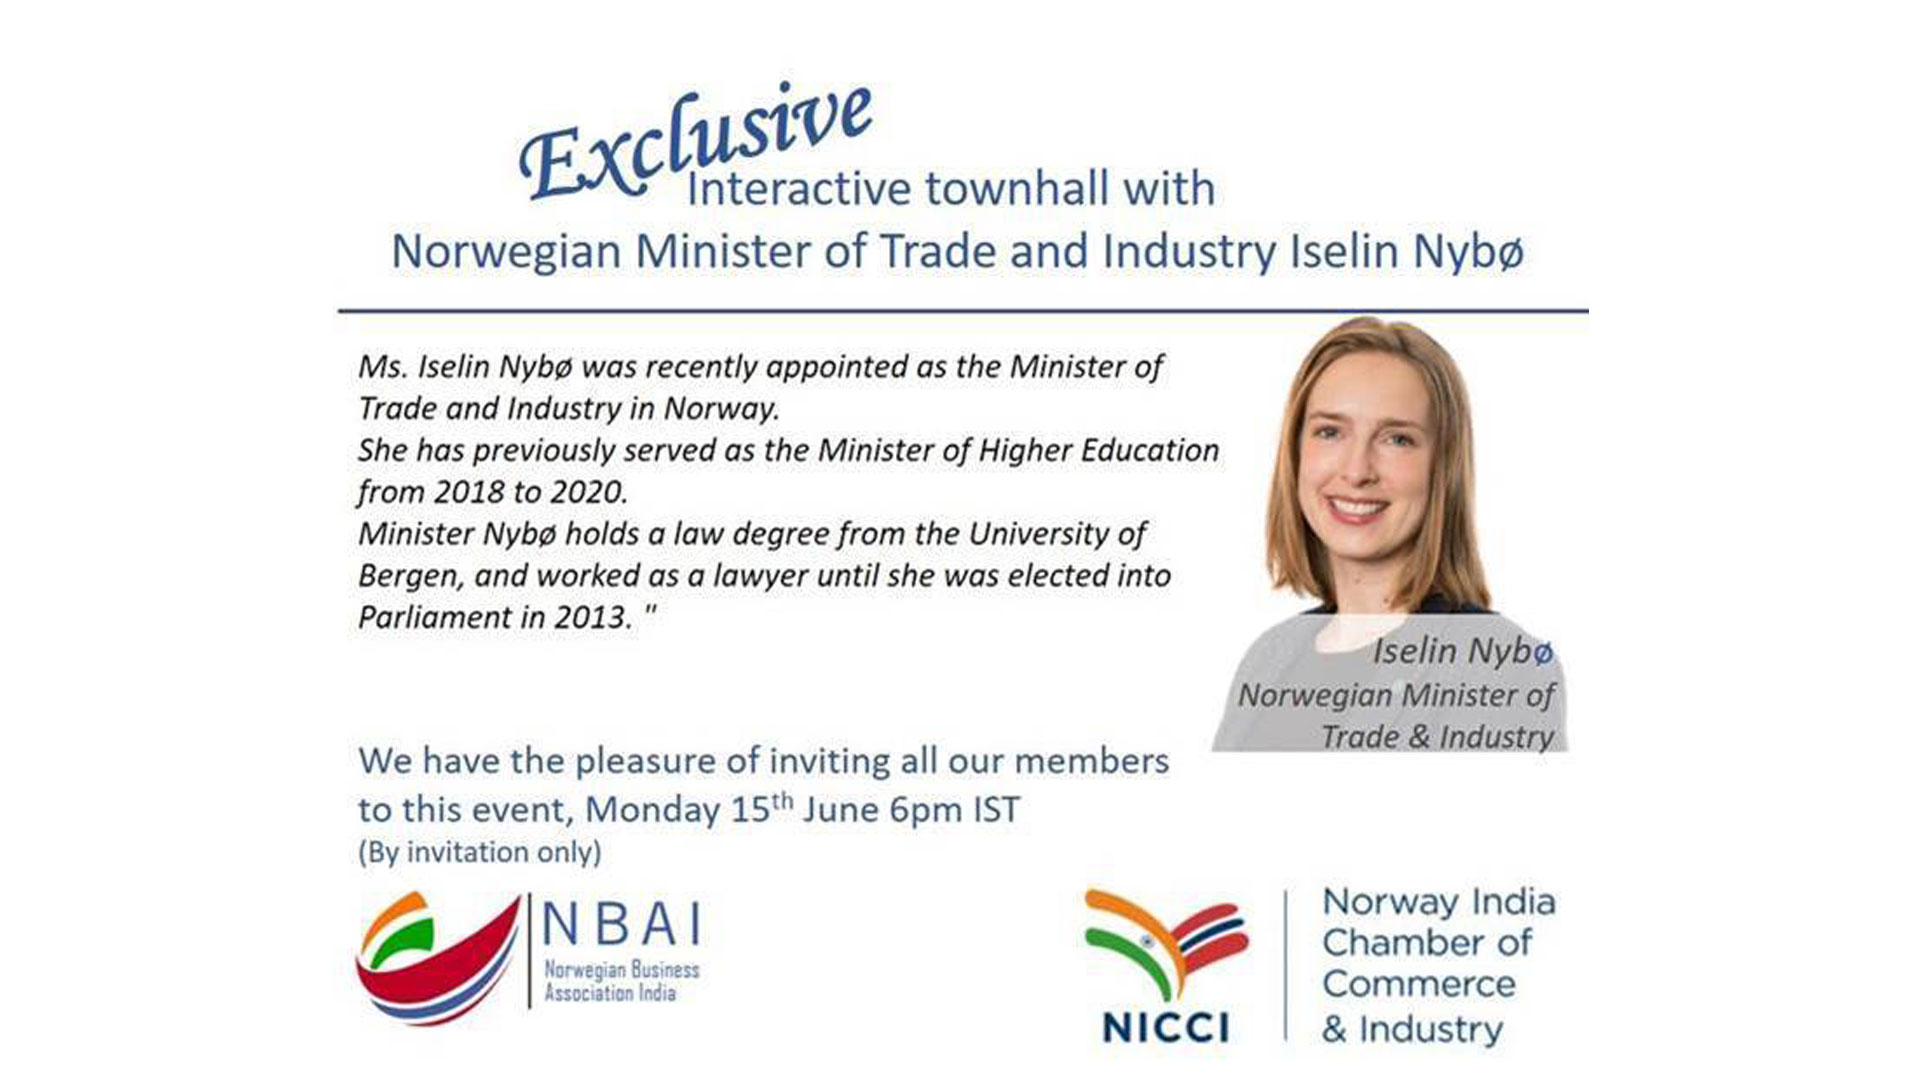 INTERACTIVE TOWNHALL WITH NORWEGIAN MINISTER OF TRADE & INDUSTRY, Ms. ISELIN NYBO.